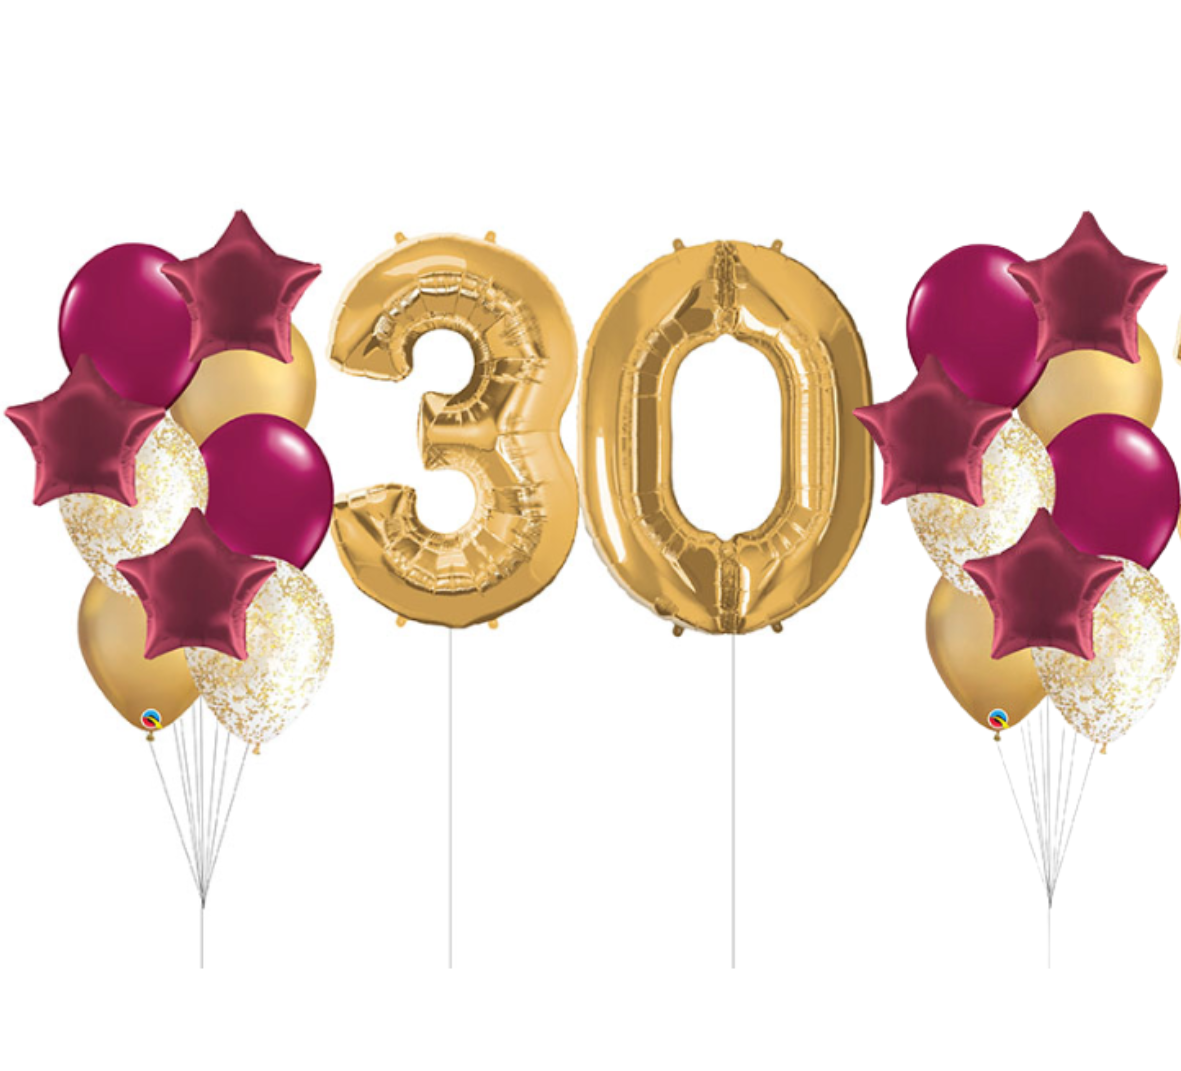 Burgundy & Gold Numbers Balloon Bouquet